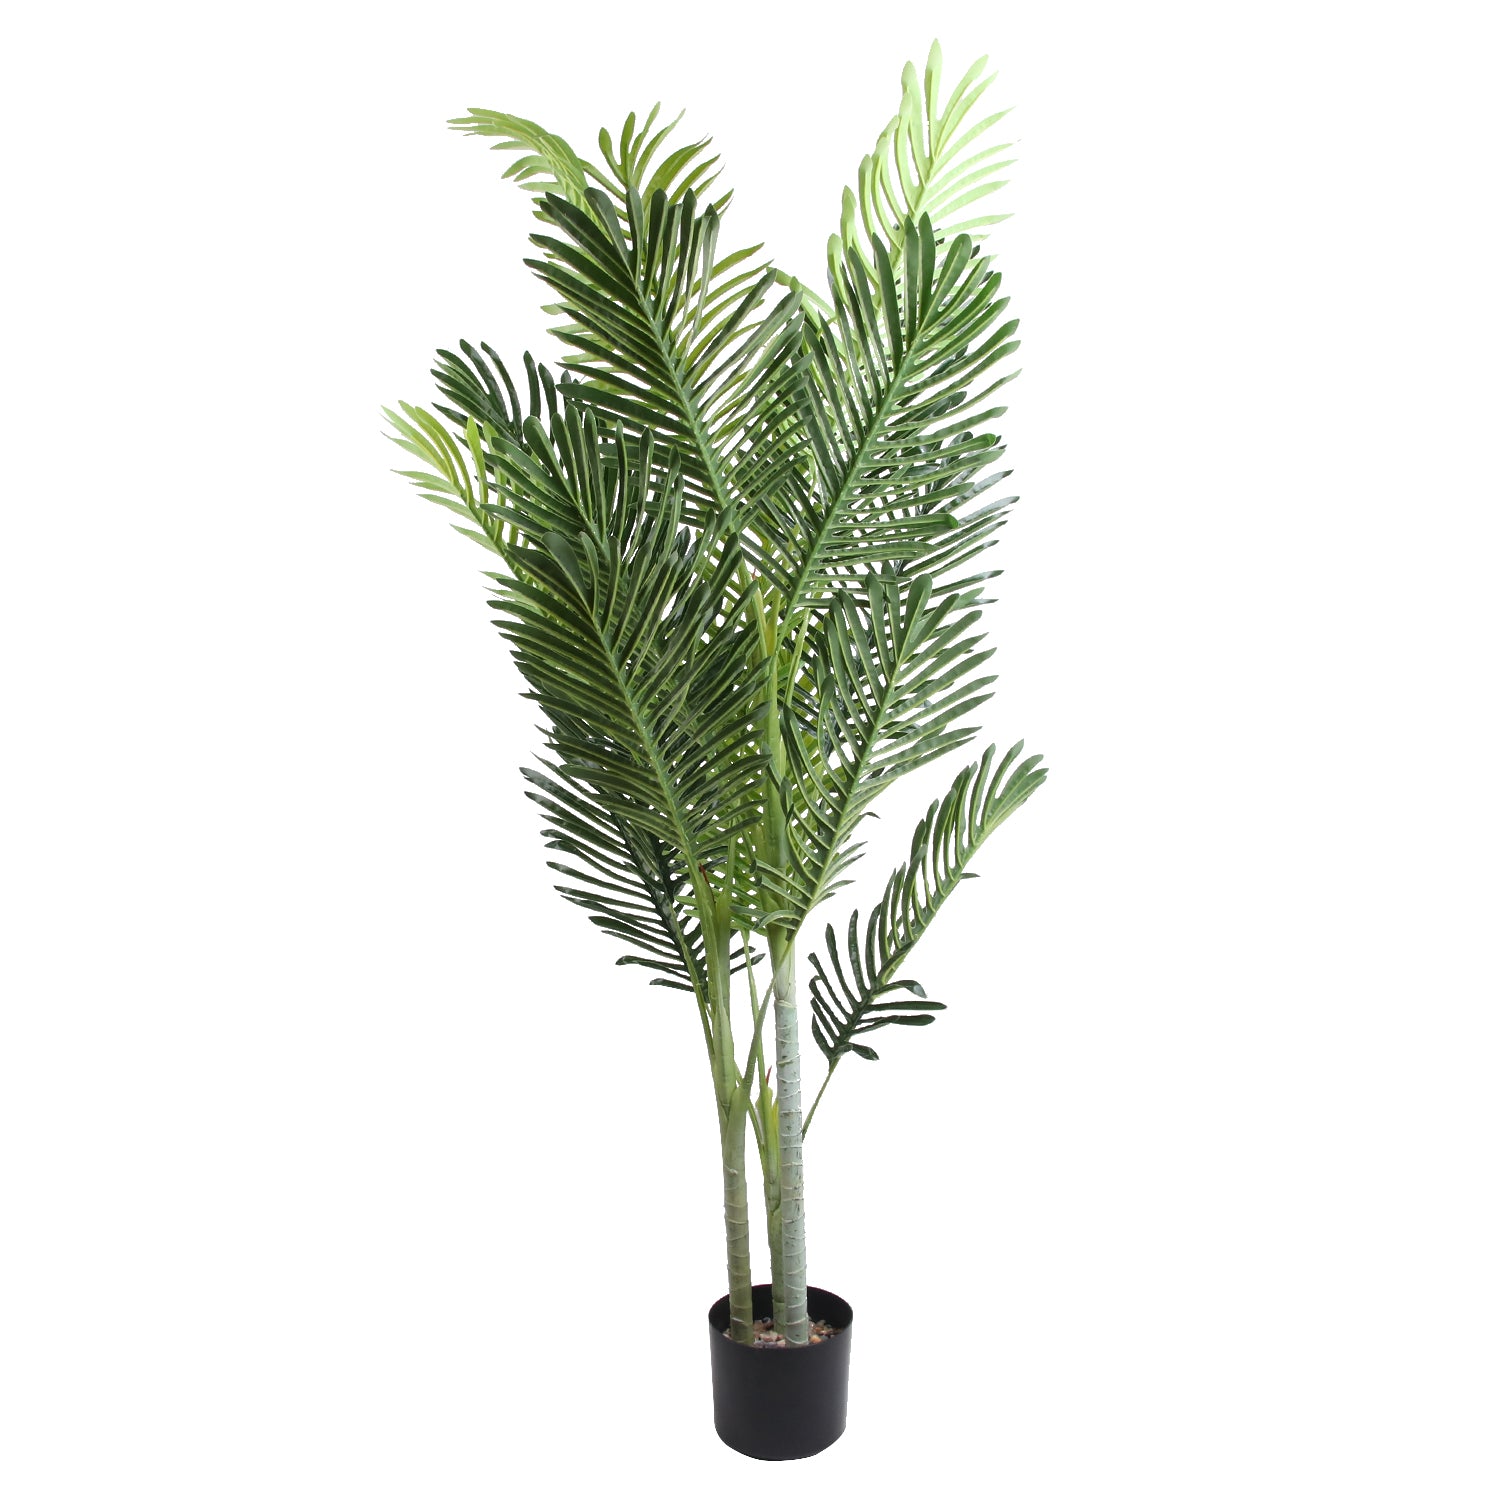 OKO FAUX POTTED PALM TREE PLANT 5'